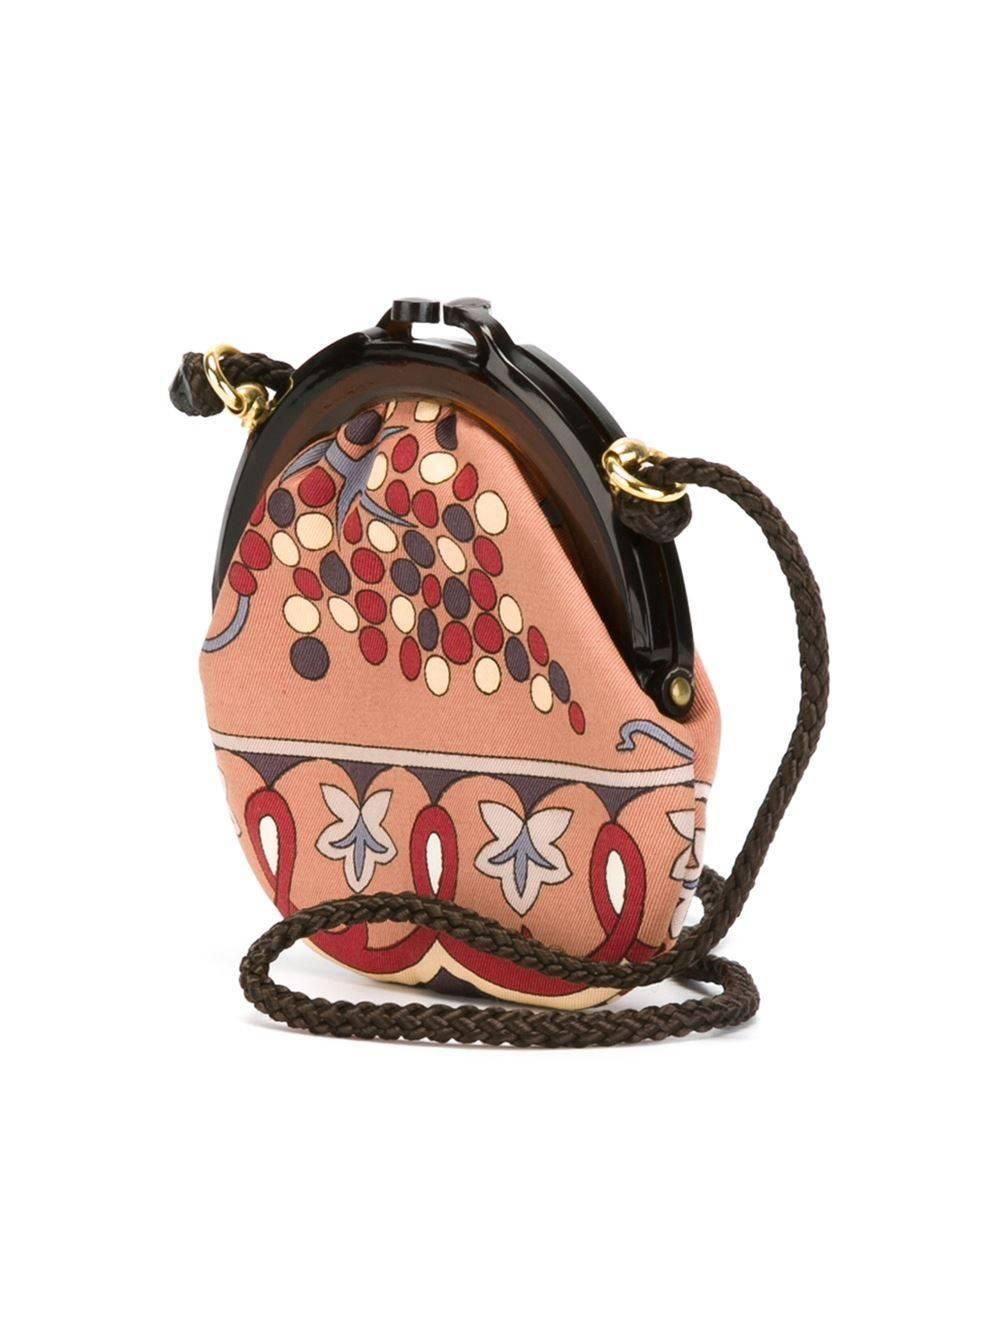 This small vintage pouch bag from Emilio Pucci is crafted in a retro print fabric and features a rope handle and a plastic frame with a kiss lock.

Colour: Multi
Material: Cotton 100%
Measurements: width: 11cm, height: 11cm, depth: